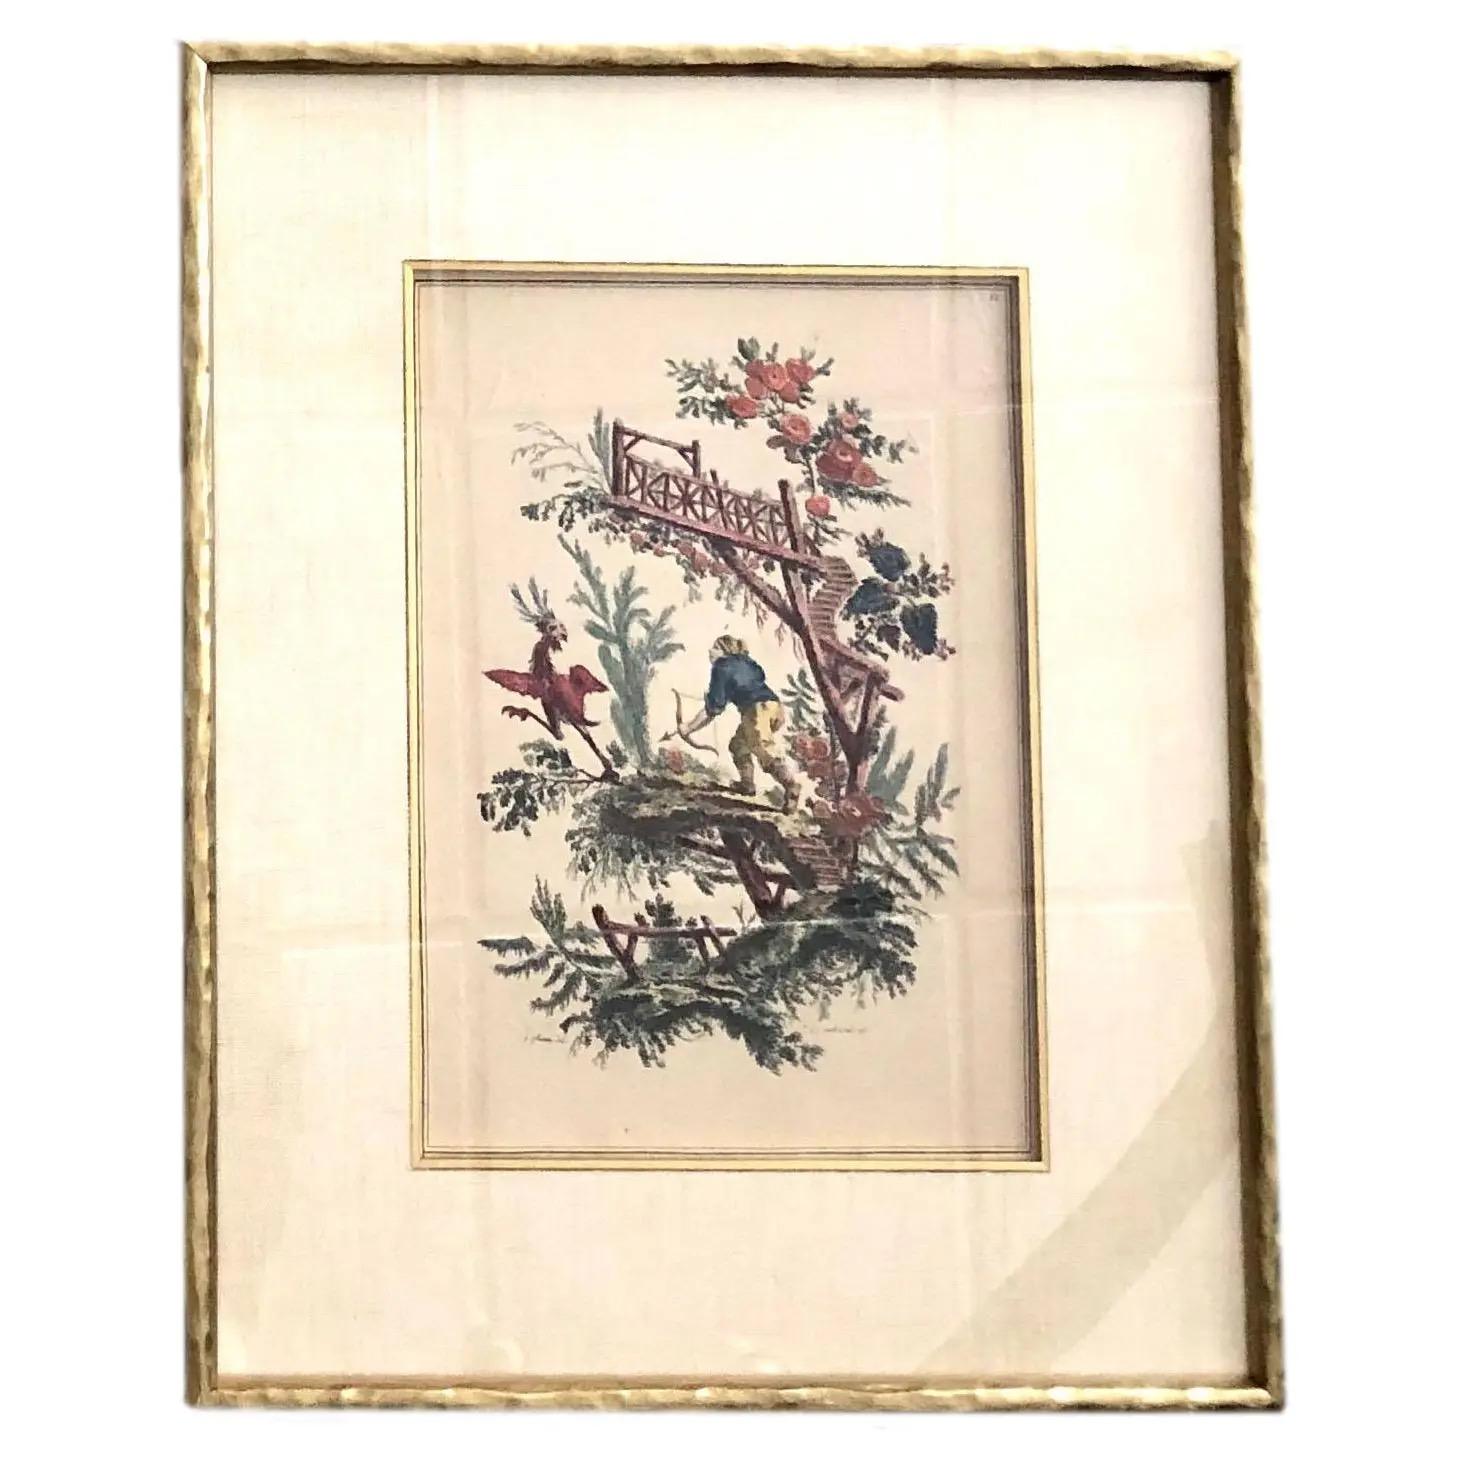 18th century circa 1750s English chinoiserie figures in the french taste. Drawn, designed and hand colored by Jean Pillement and engraved by P. C.Canot. In Italian gilded bamboo style frames with a modern twist. The set of four engravings have two